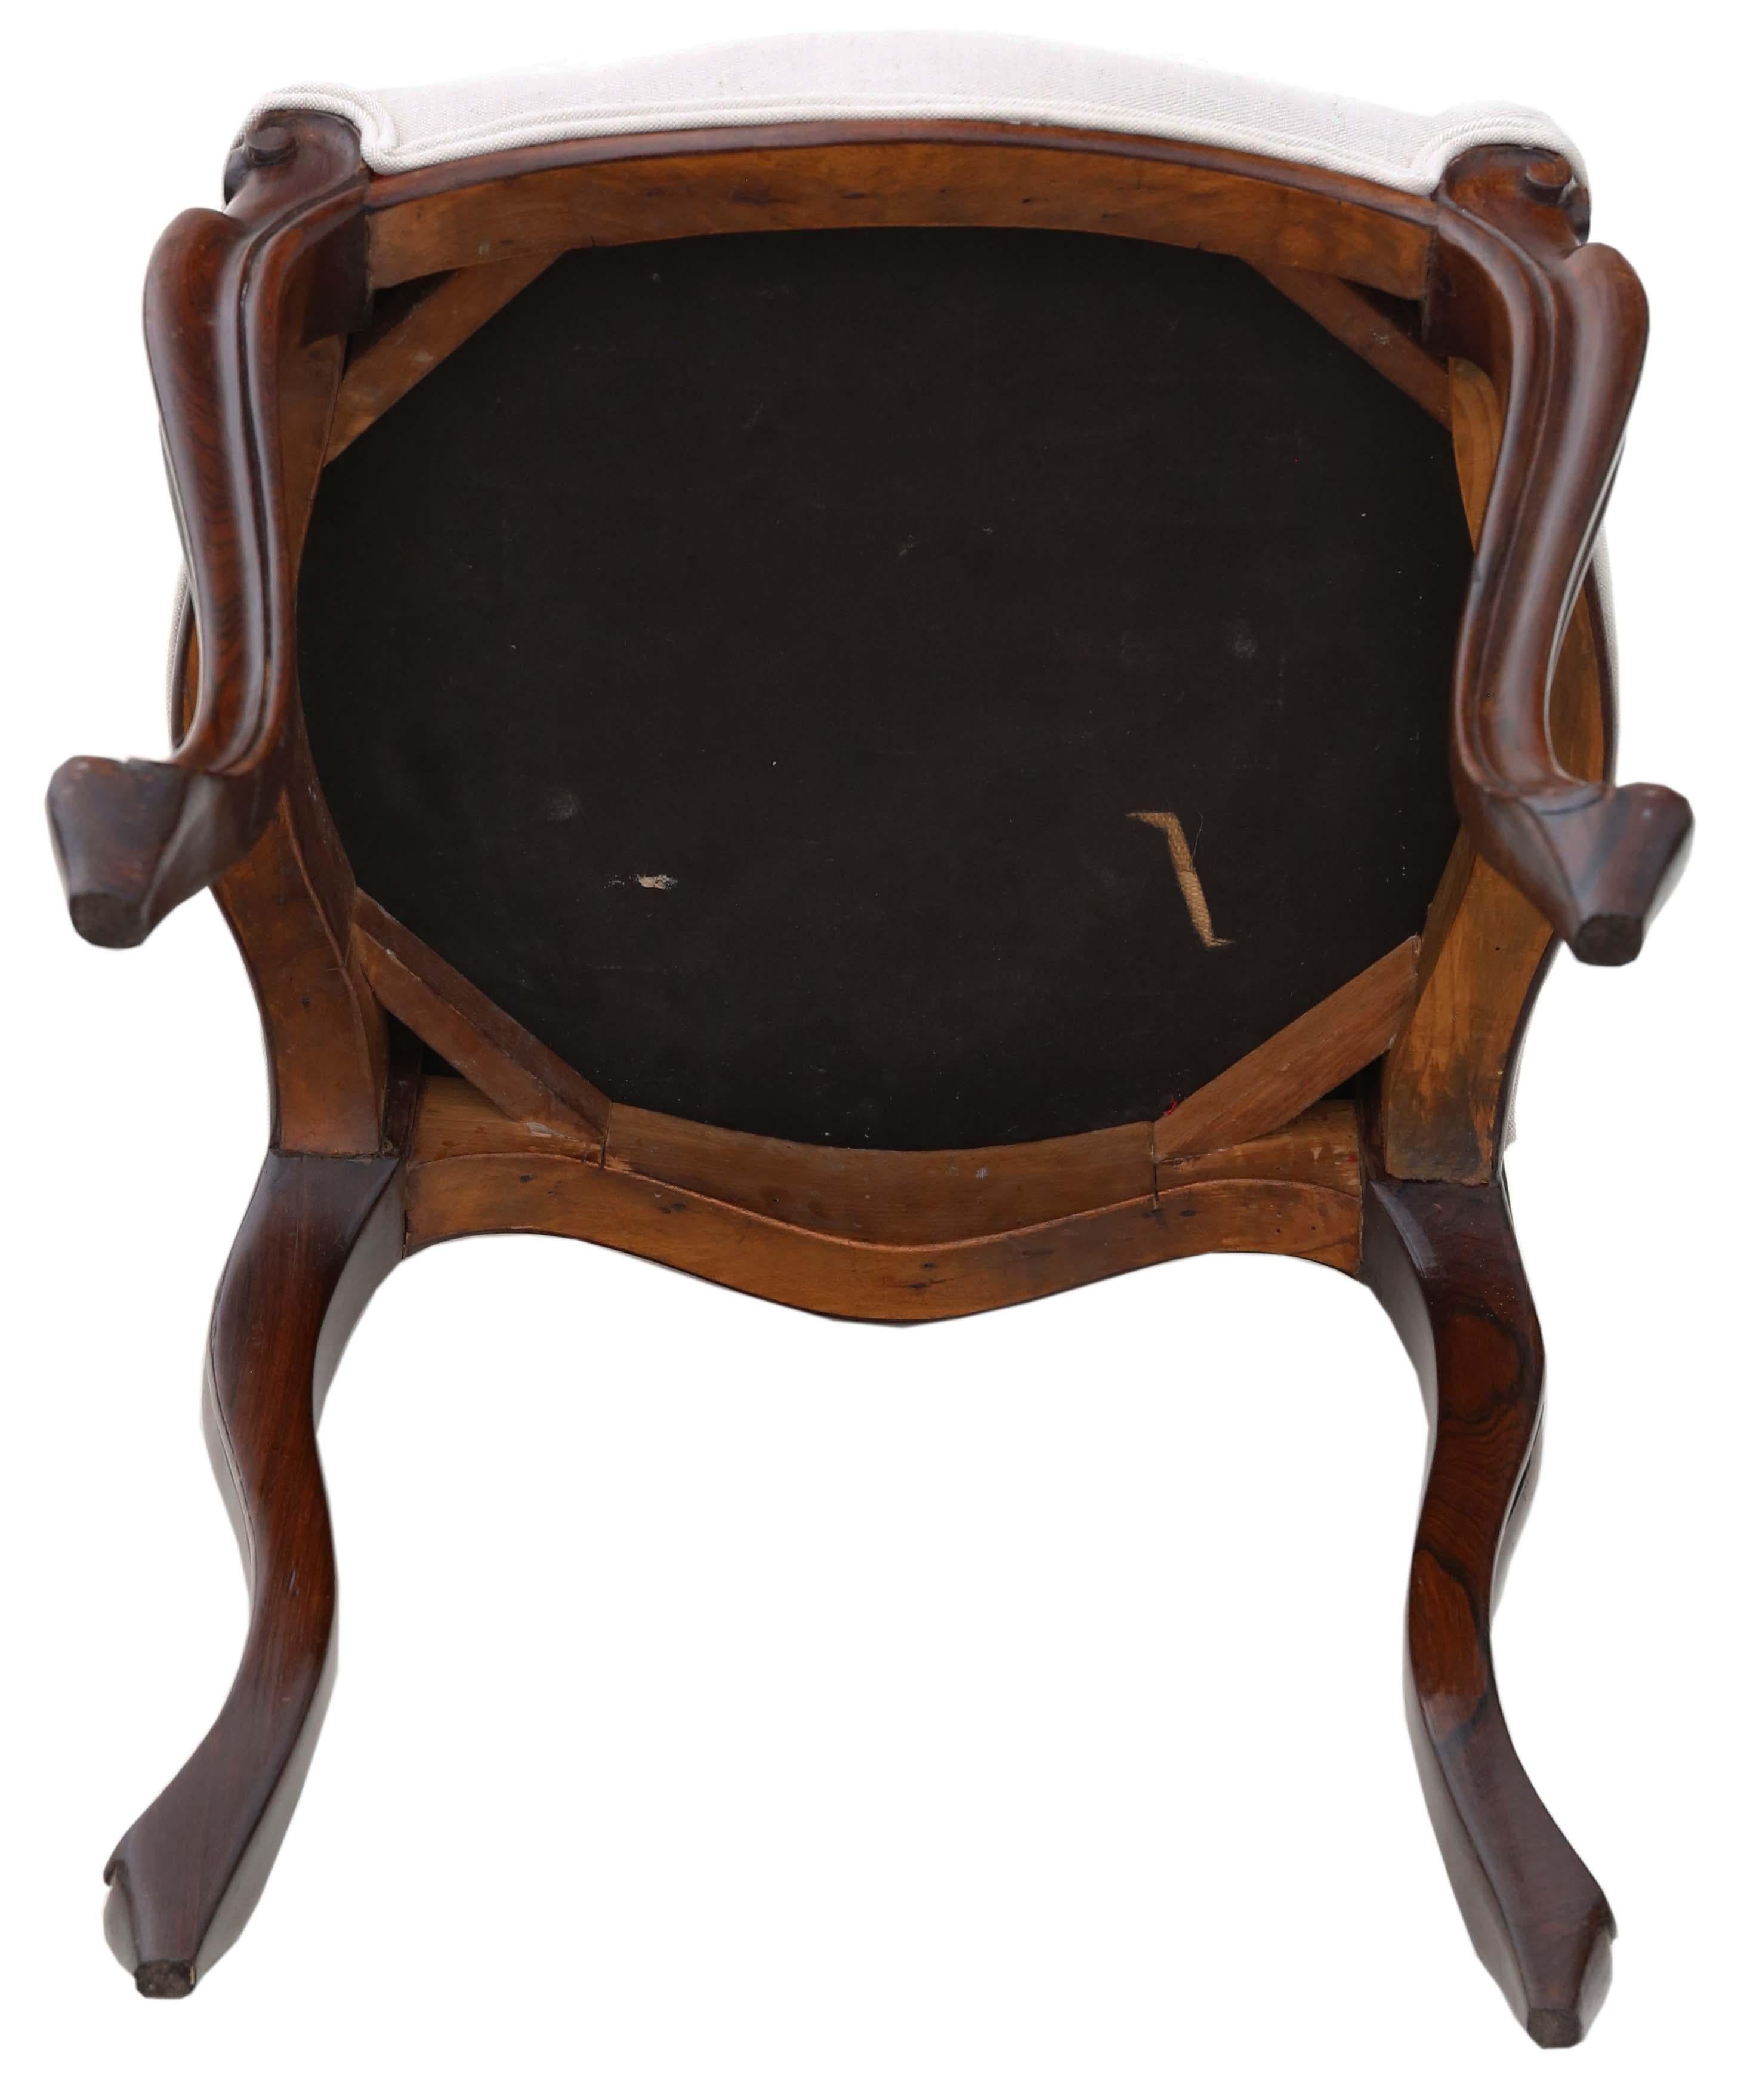 Antique Fine Quality Upholstered Rosewood Stool 19th Century For Sale 1